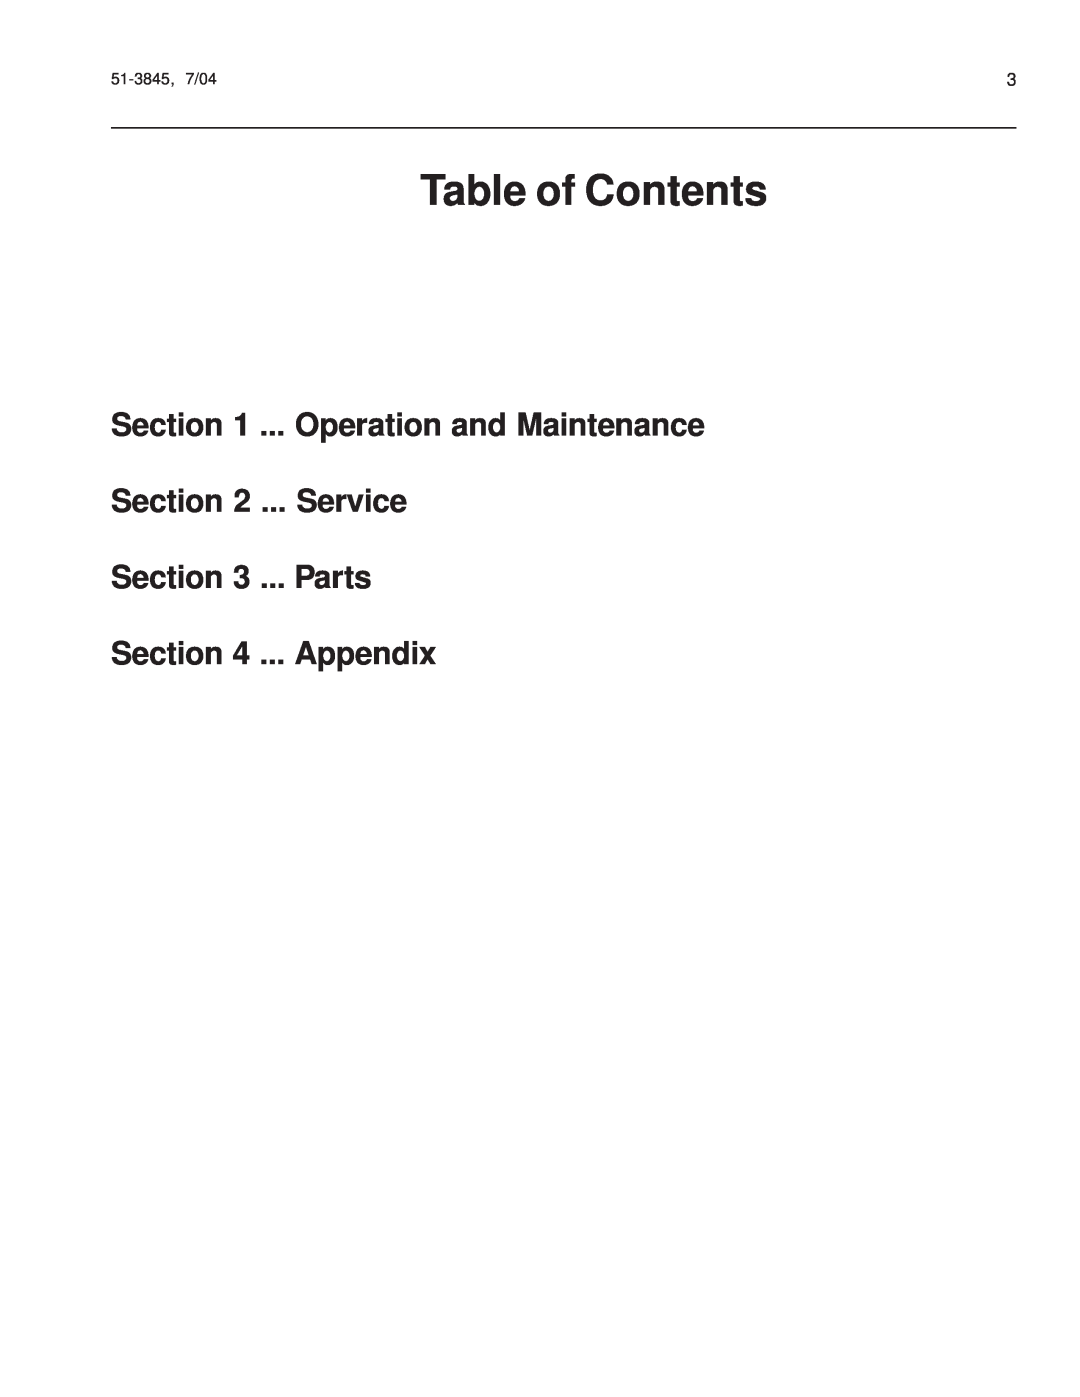 Snapper 151-3845, M26 Series manual Table of Contents, Operation and Maintenance, Service ... Parts, Appendix 